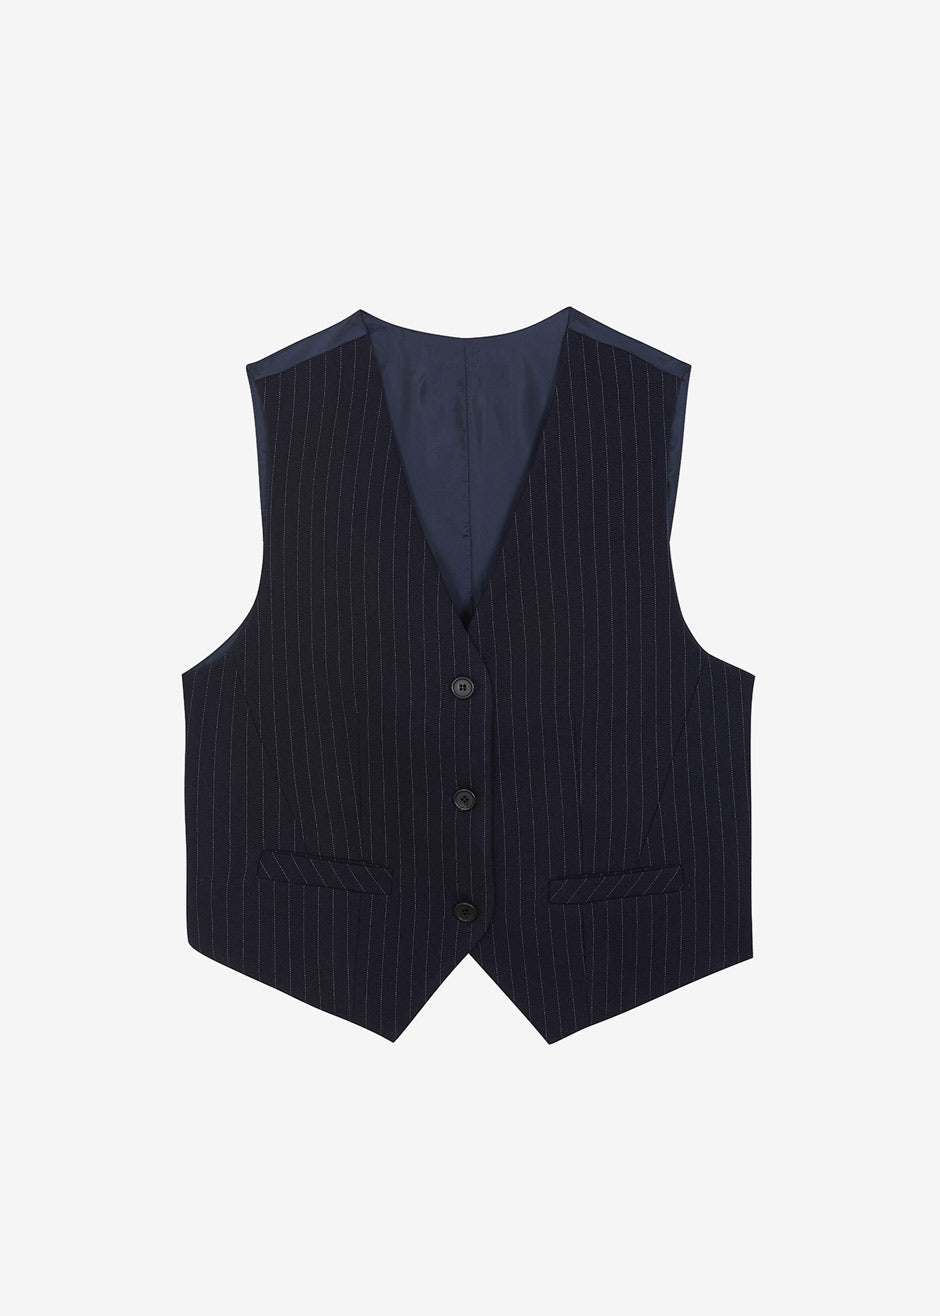 Tansy Tailored Vest - Navy Pinstripe - 12